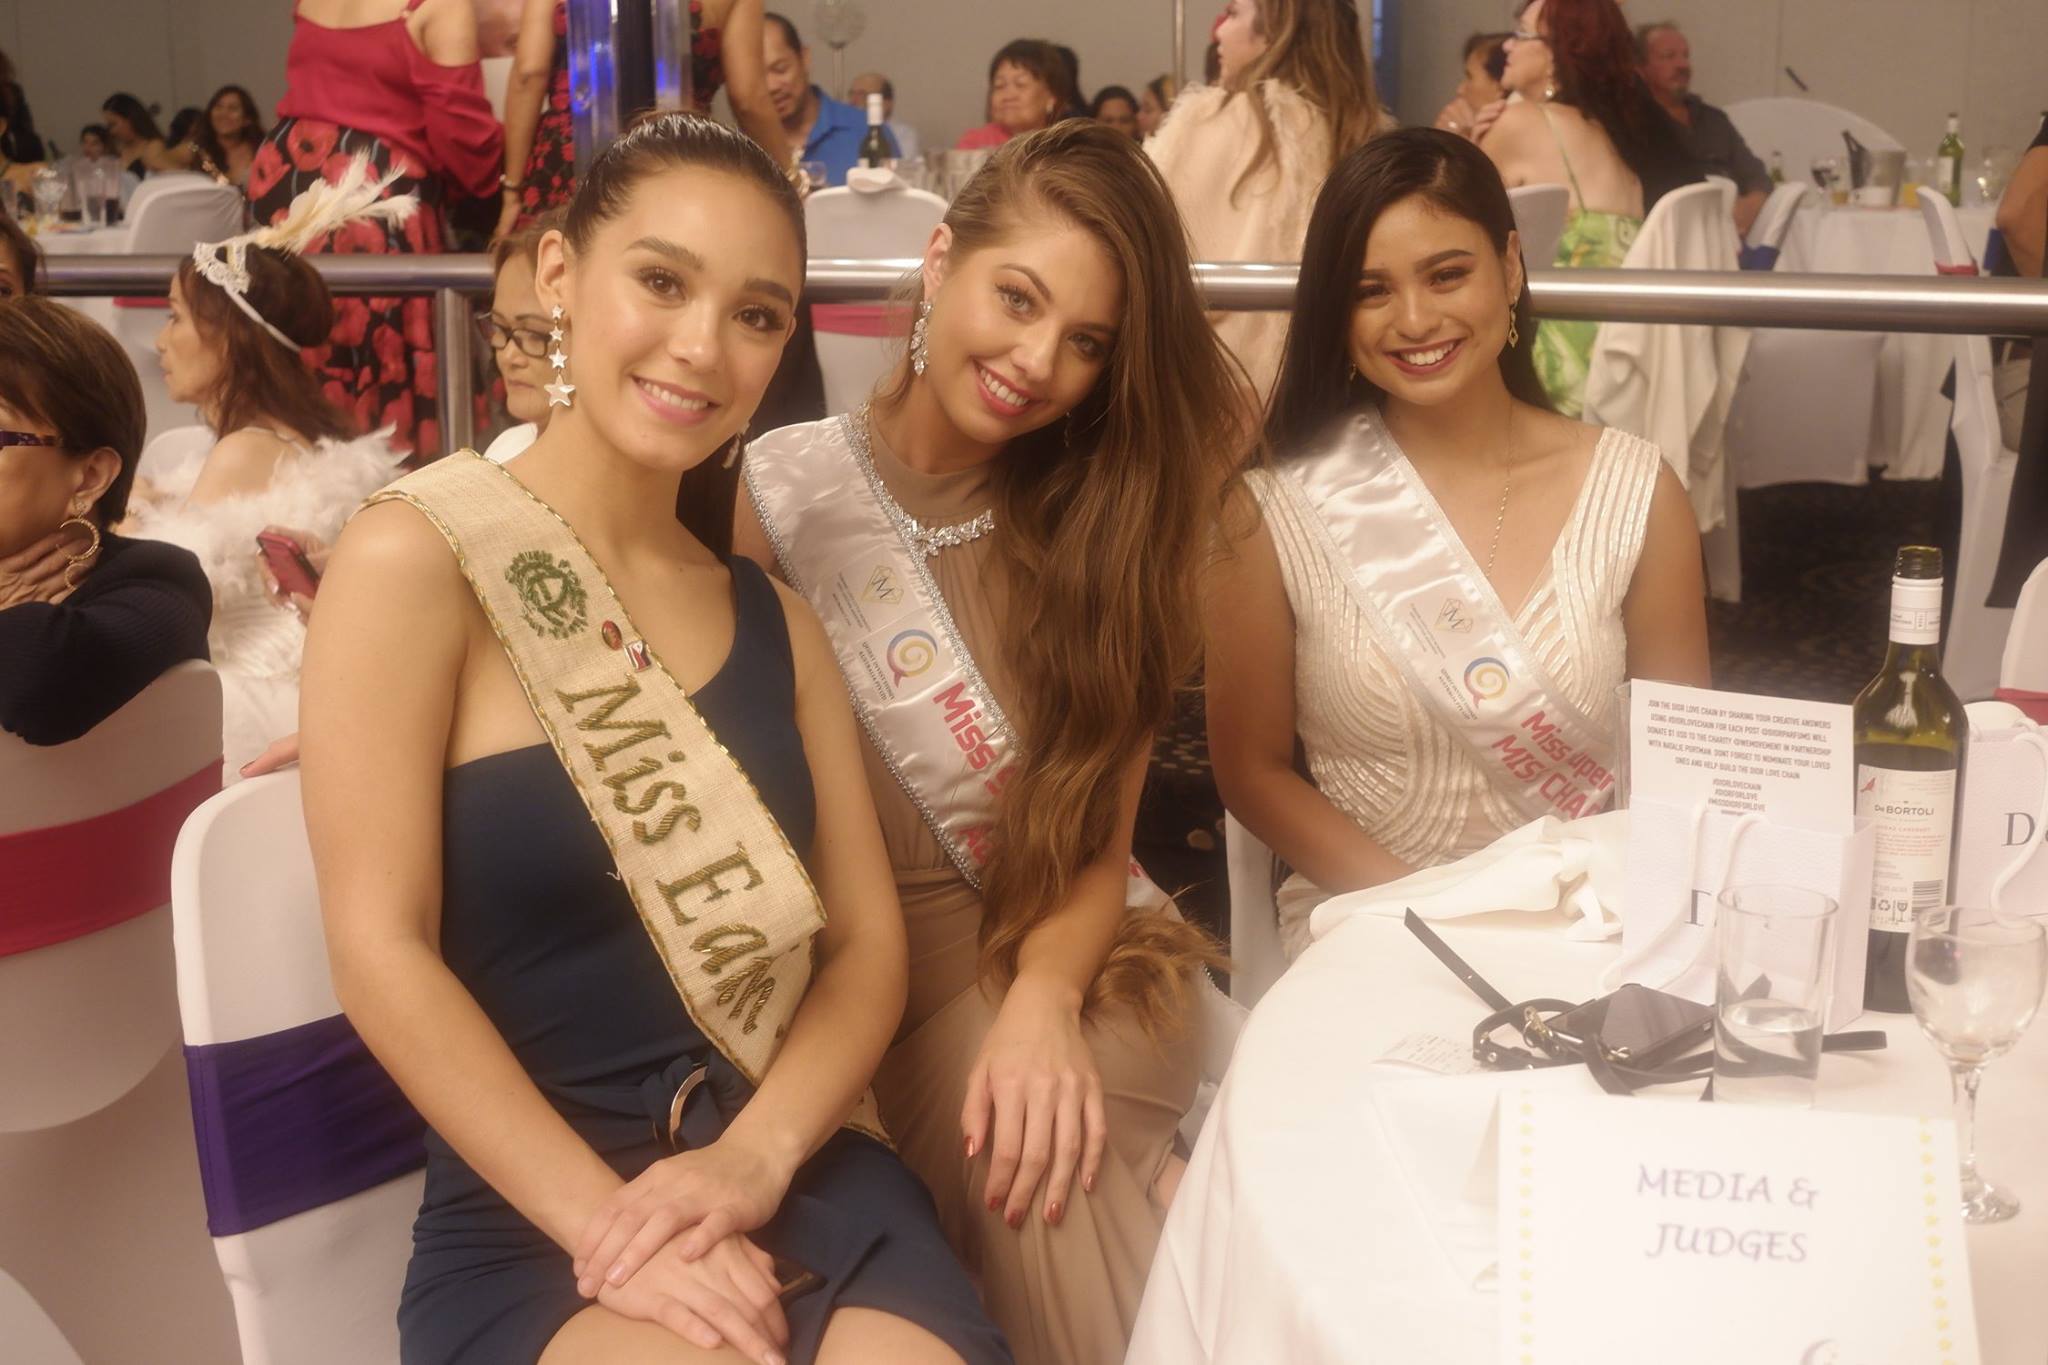 smad-pageant-raffle-rpizes-charity-melbourne-charity-philippines-davao-palawan-rio-2019-dinner-dance-melbourne-australia-chrity-ball.jpg